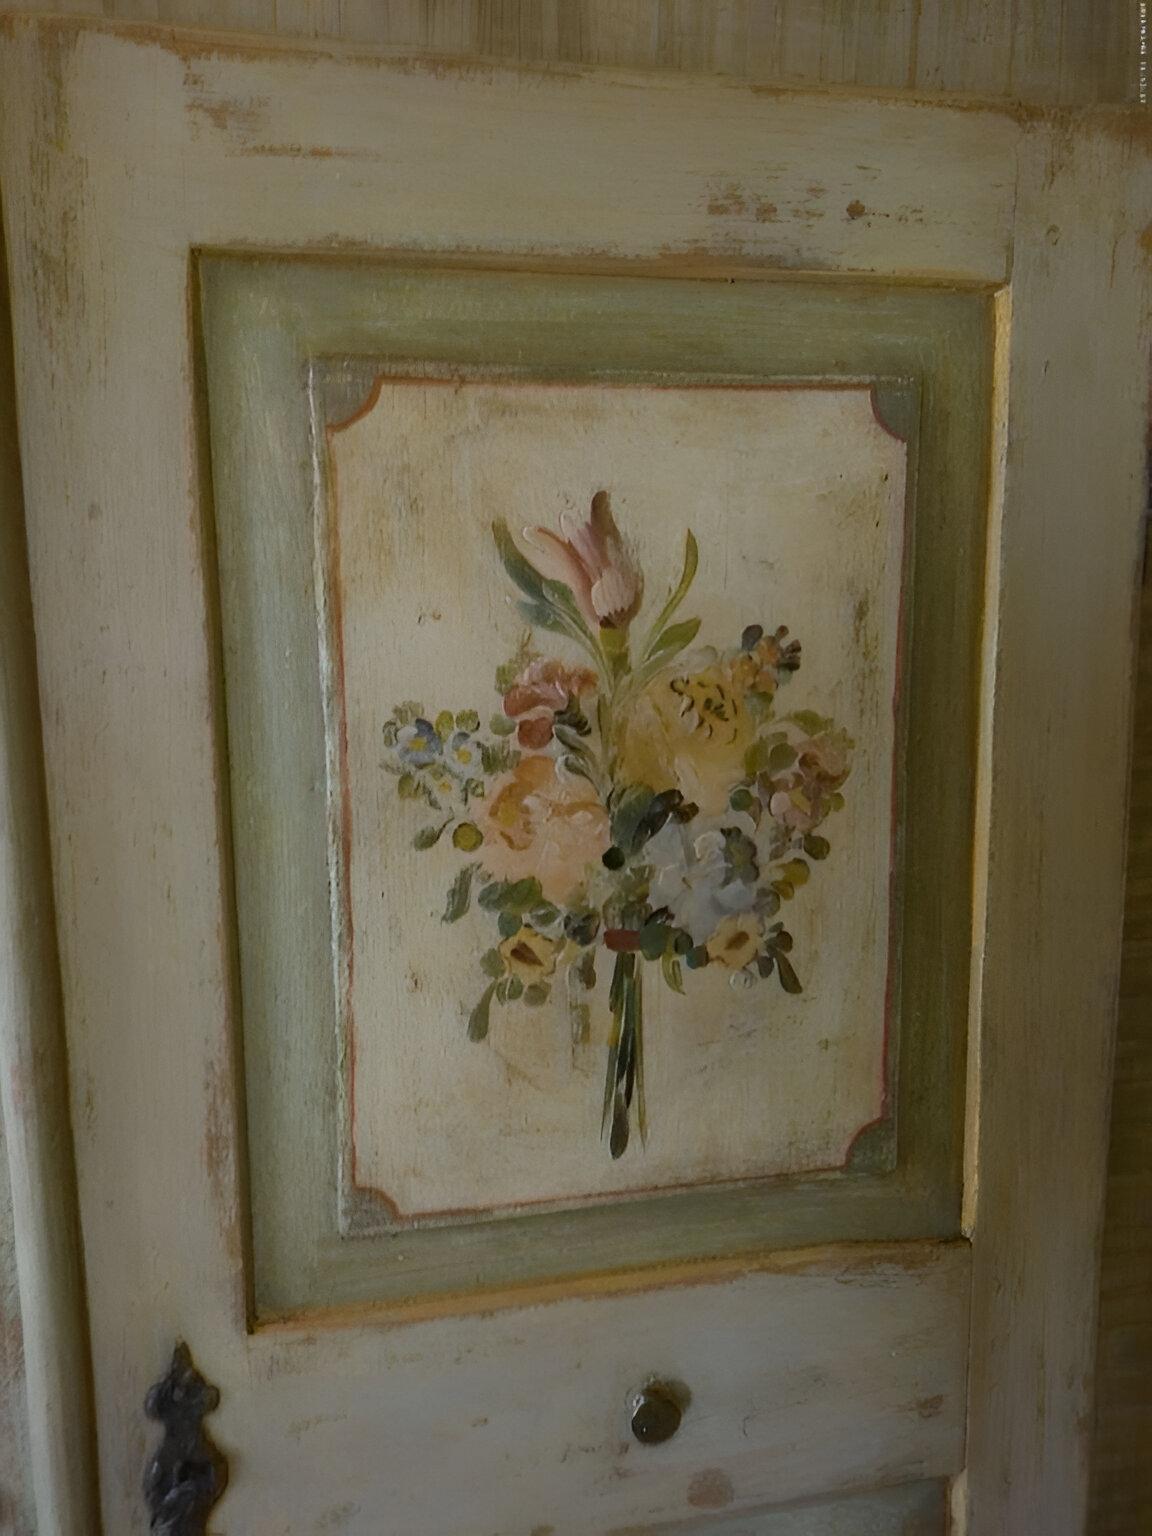 Painted fir cabinet.
Internal shelves and hangers.

Large 2 door decorated fir cabinet with interior shelves and hangers.
Painted with floral motifs on an ivory background.

Restored, excellent condition.

Reference measurements at the frame.
More